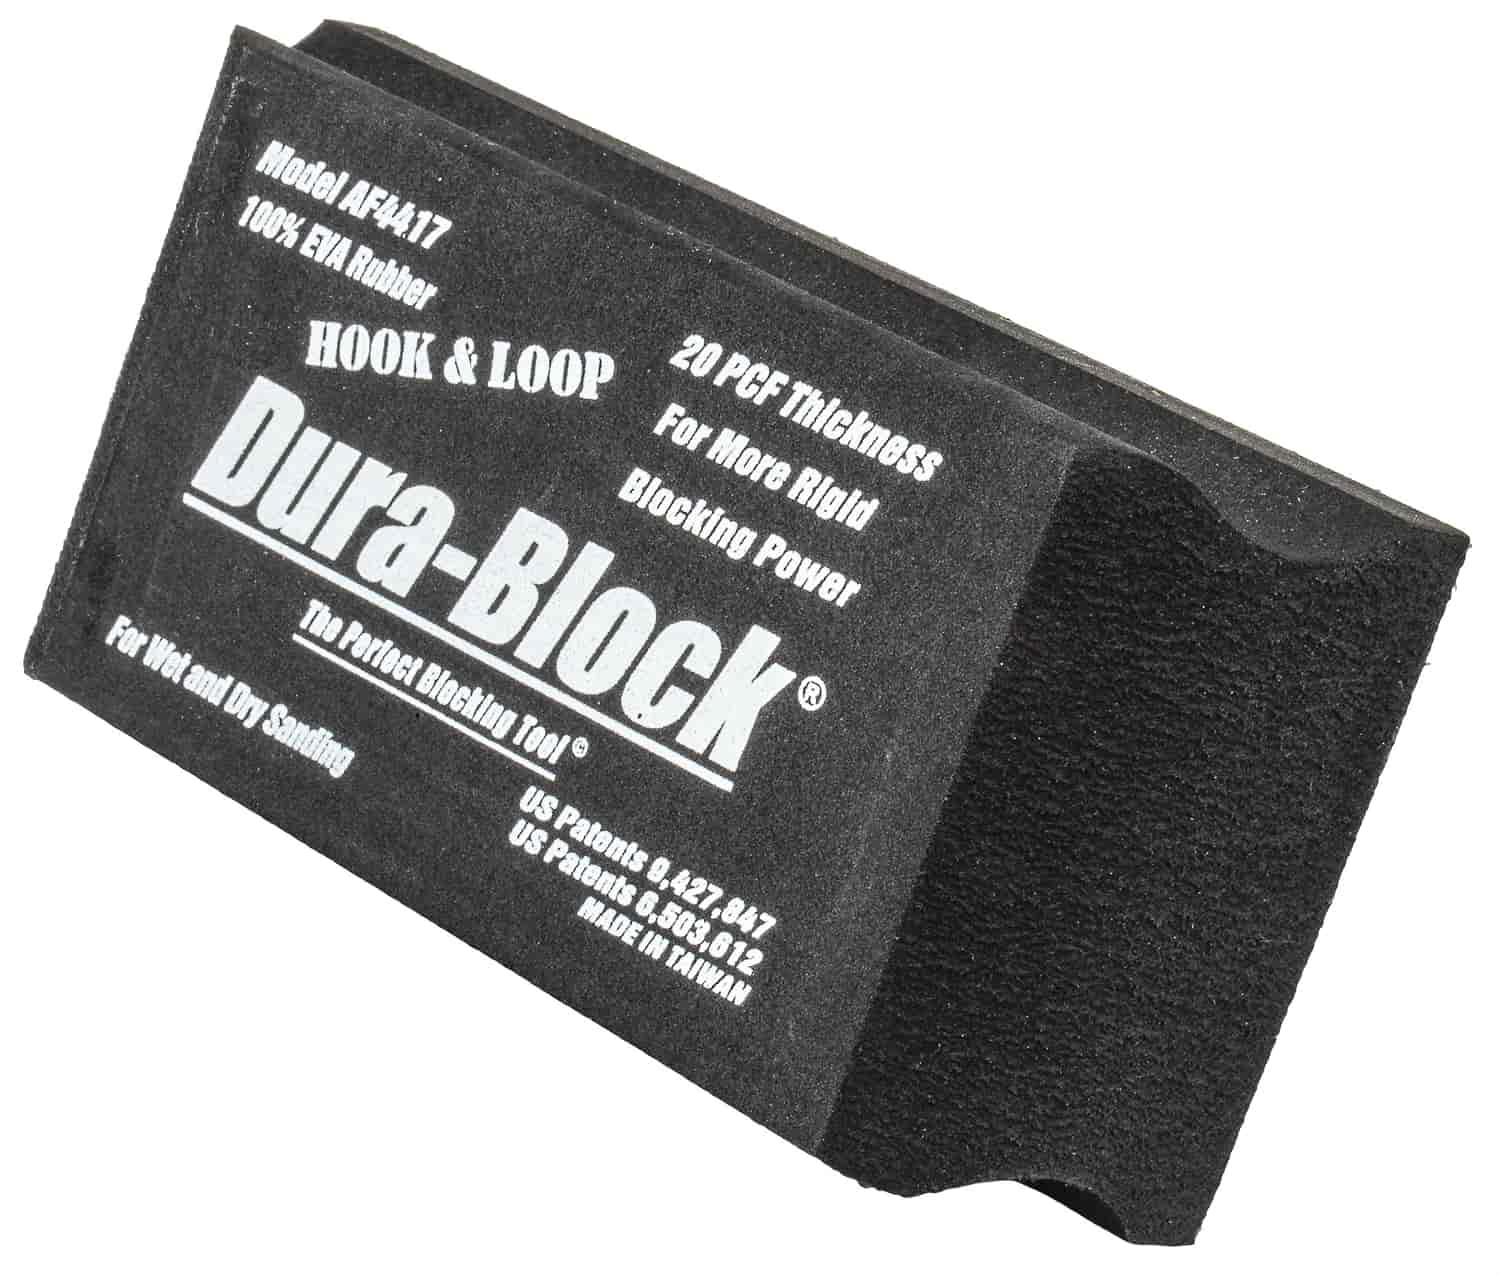 Dura-Block Sanding Block [1 1/2 in. H x 2 3/4 in. W x 5 1/2 in. L] for Wet and Dry Sanding